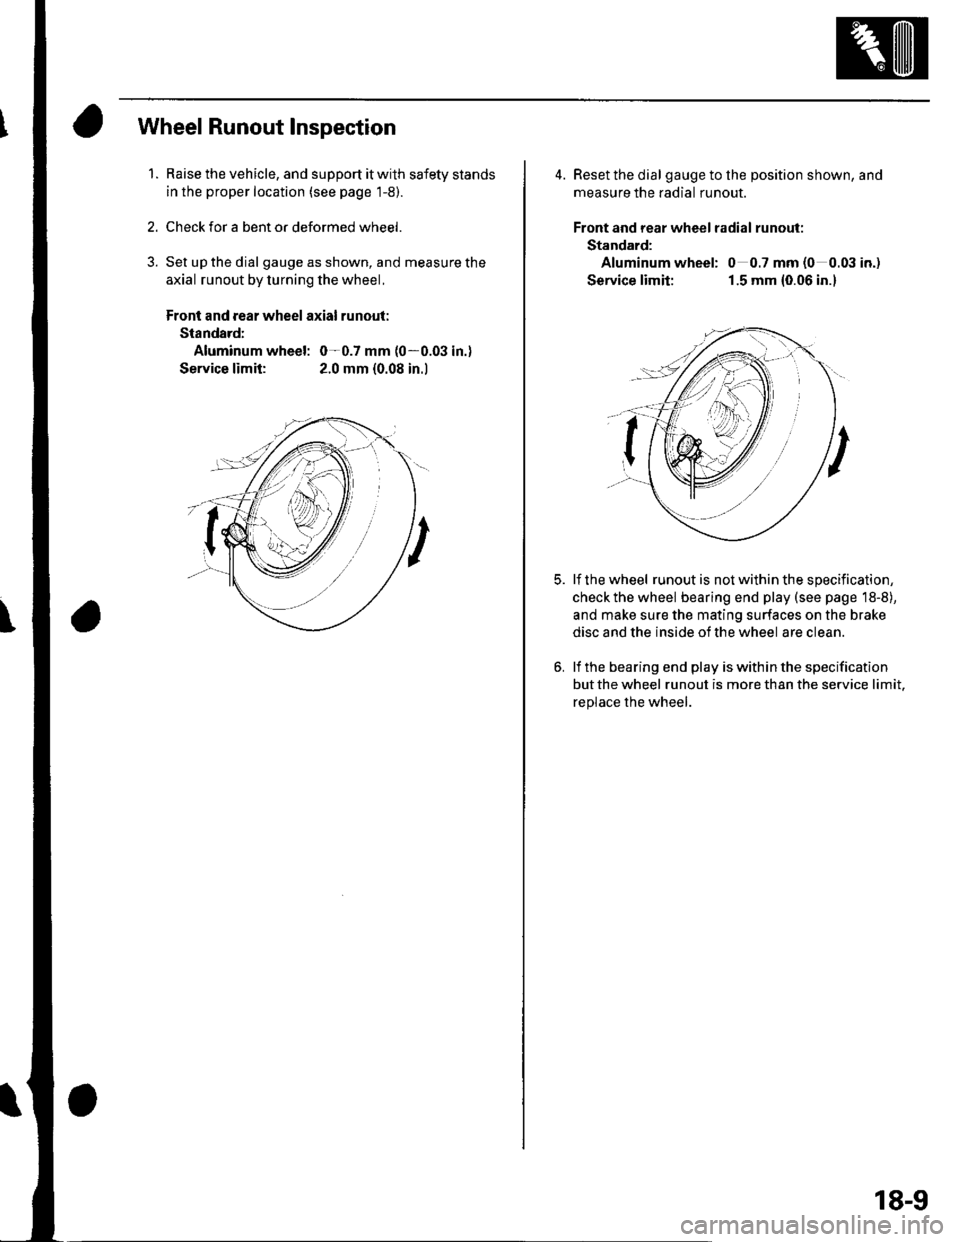 HONDA CIVIC 2003 7.G Service Manual Wheel Runout Inspection
1.Raise the vehicle, and support it with safety stands
in the proper location (see page 1-5,.
Check for a bent or deformed wheel.
Set up the dial gauge as shown, and measure th